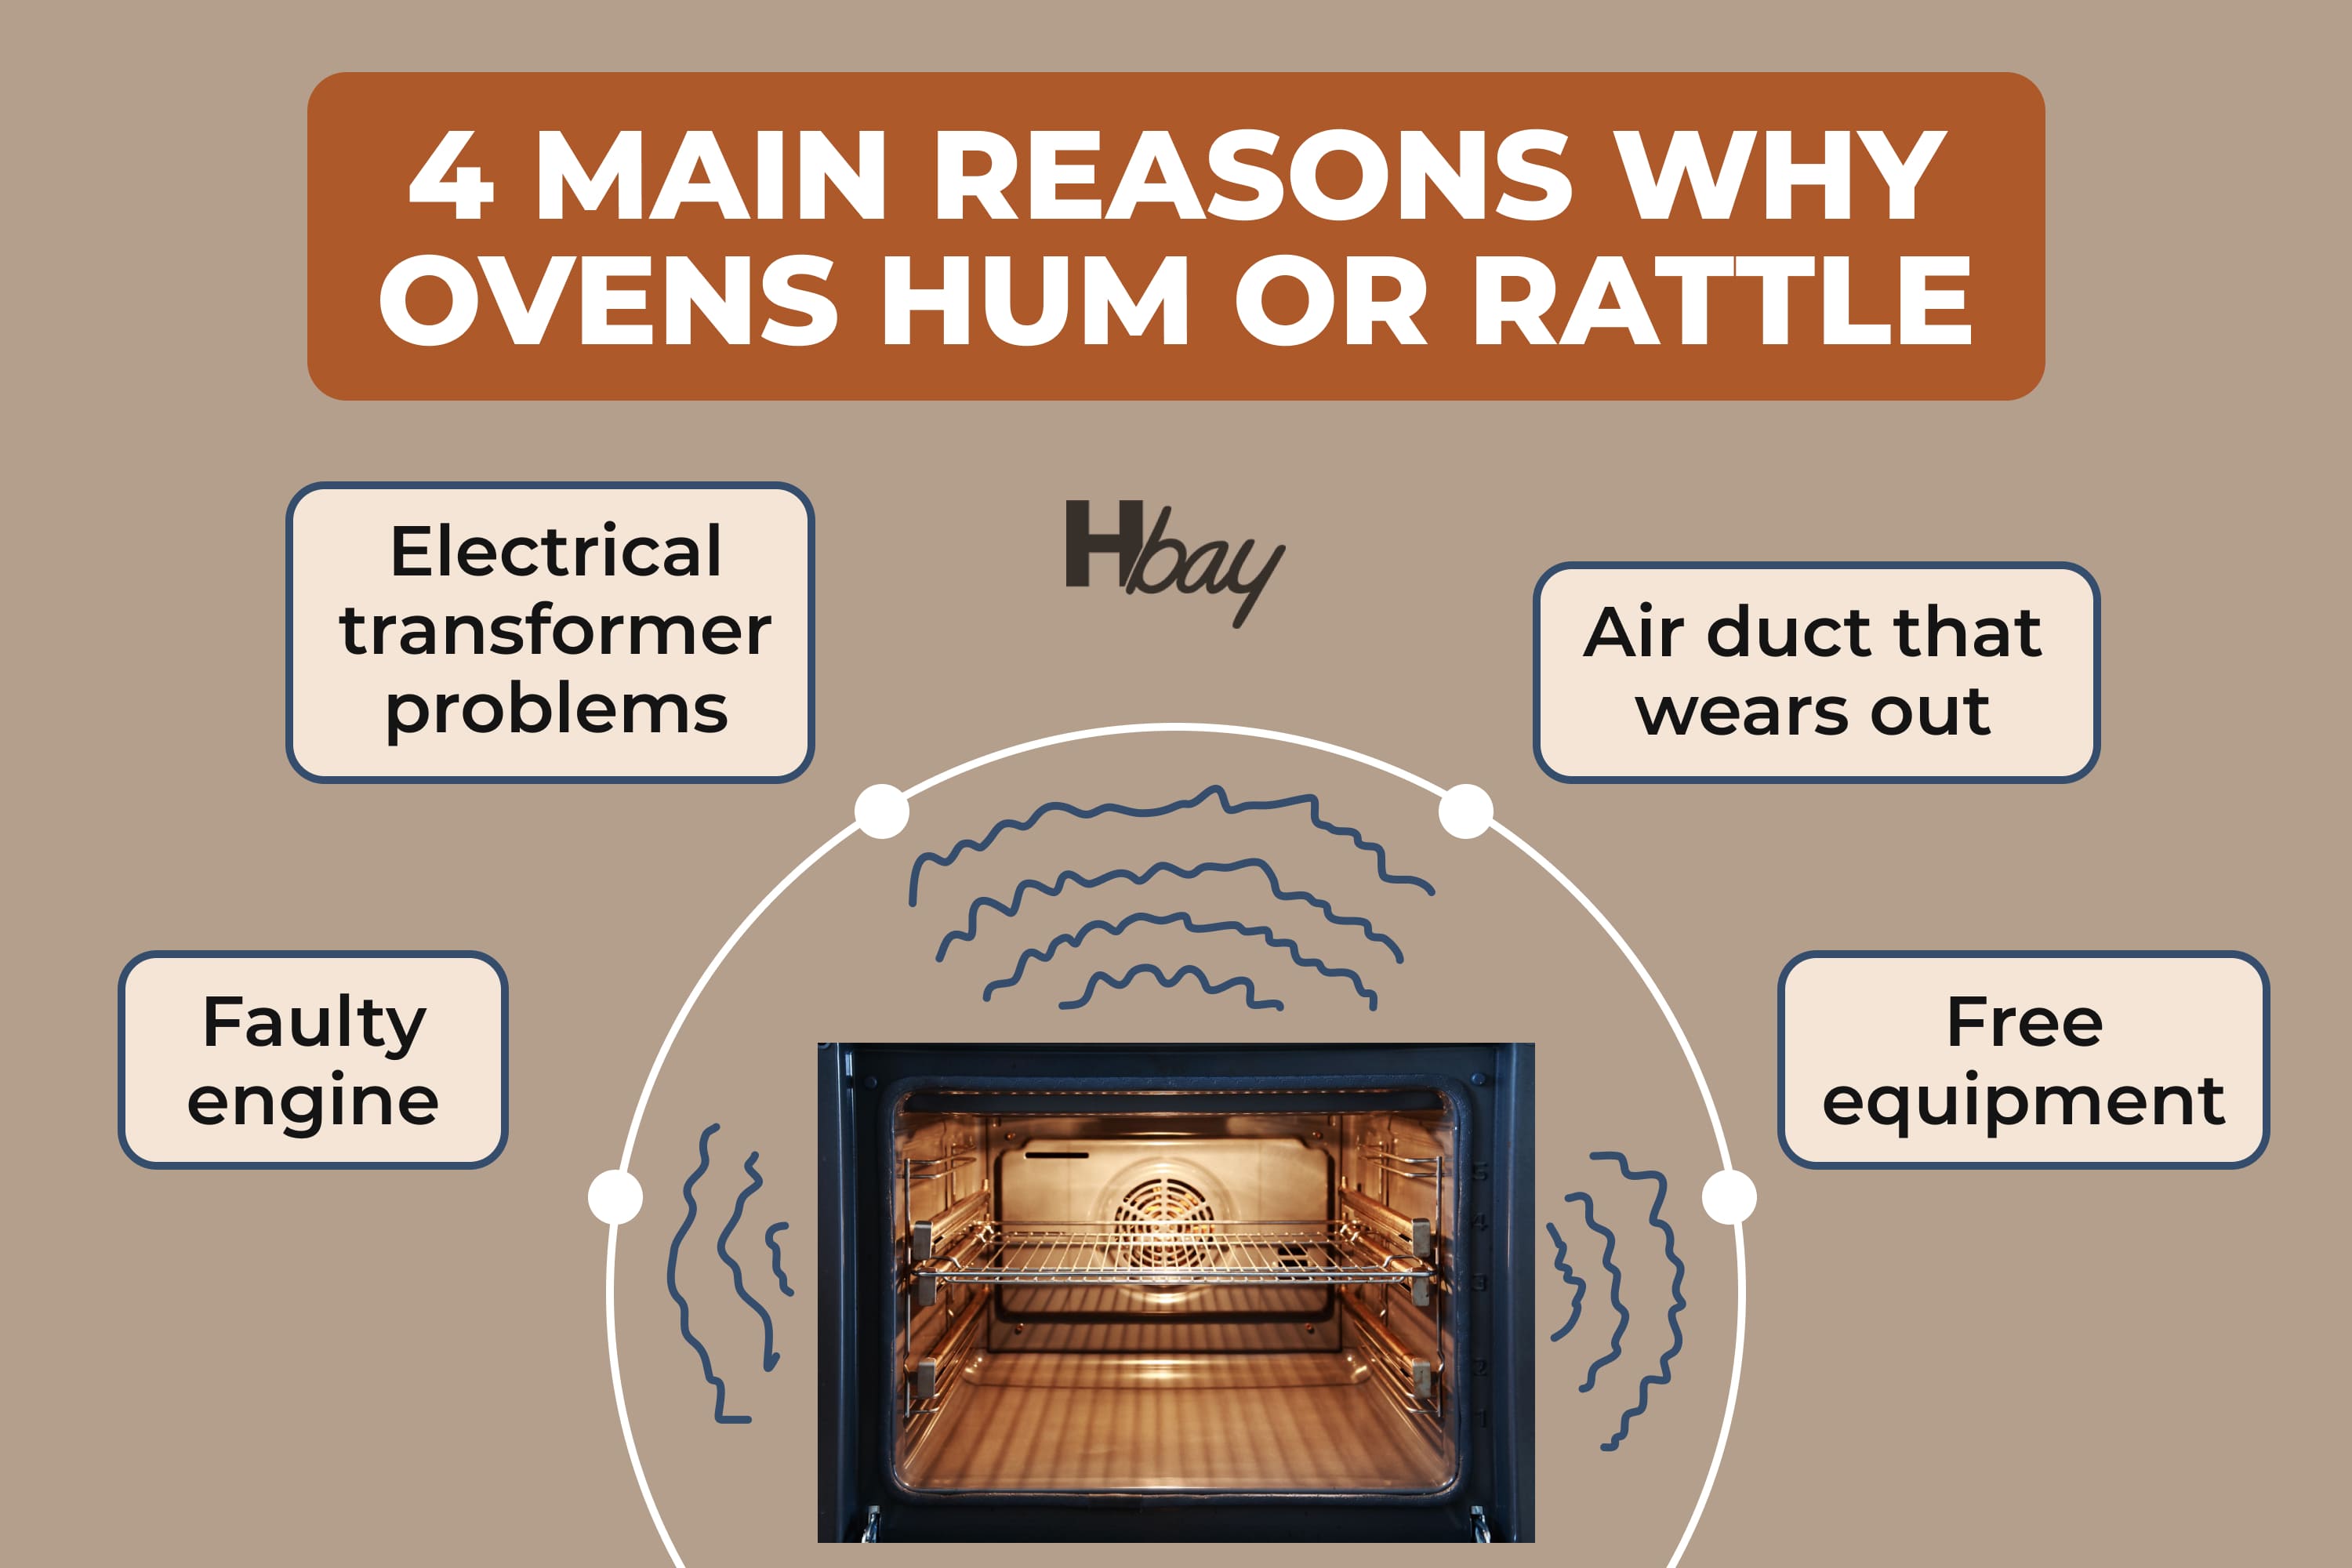 4 main reasons why ovens hum or rattle